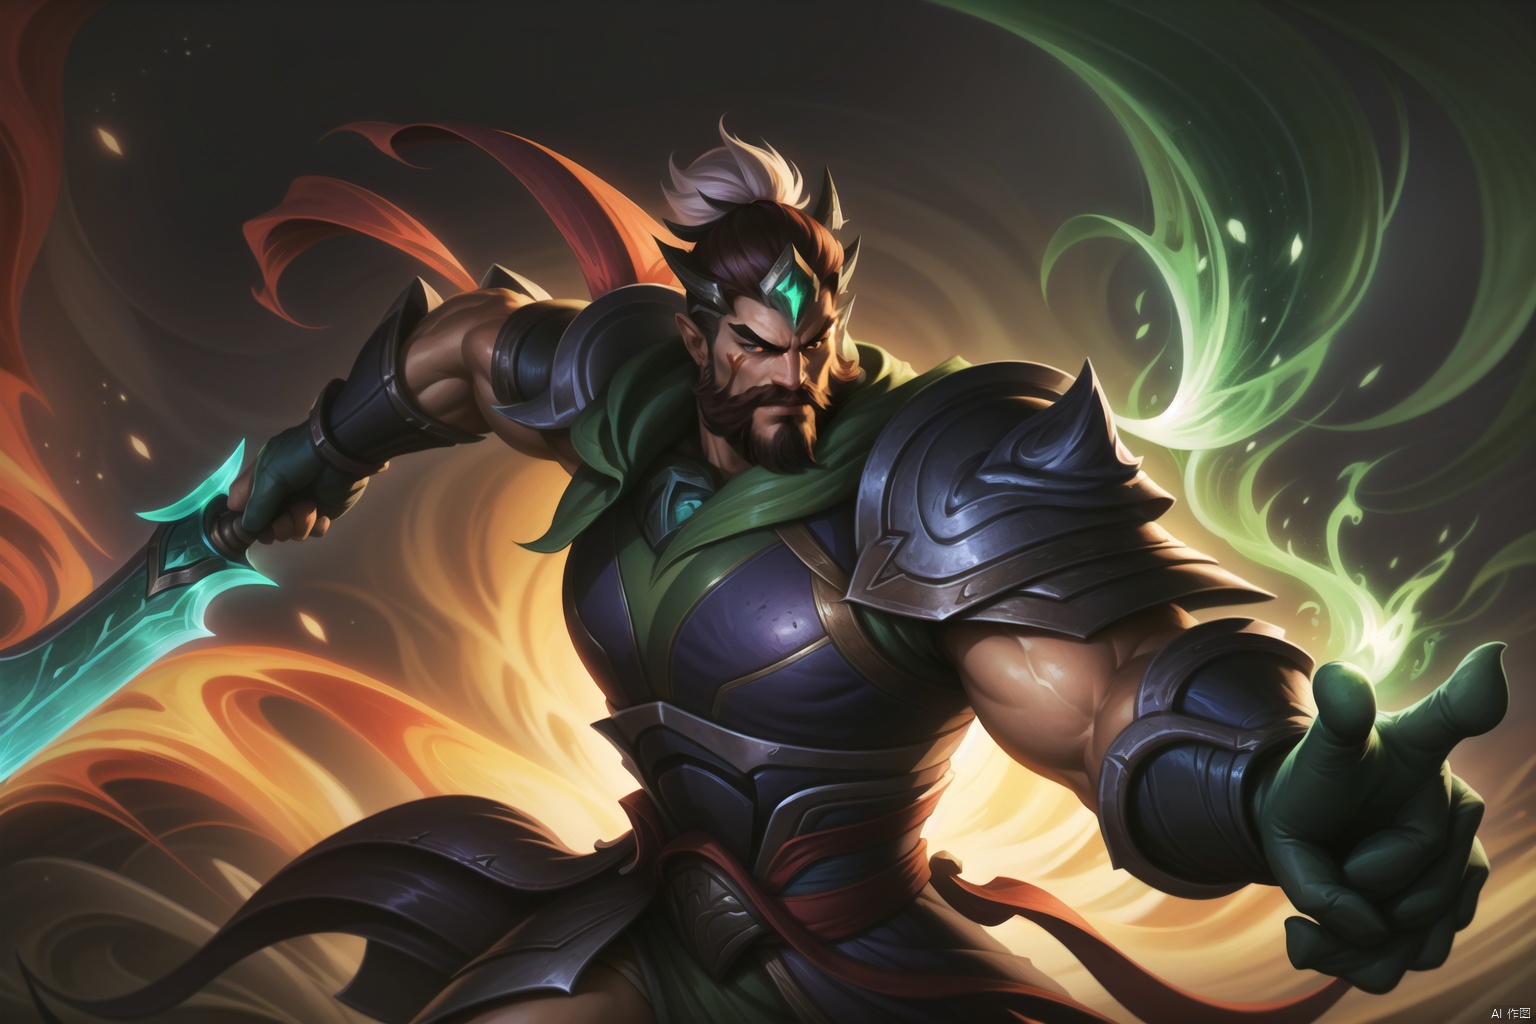  The heroic character in "League of Legends", he wears warrior armor, exudes a green aura, and holds a big knife in his hand. A close-up of a character, this painting adopts the fantasy art style of "League of Legends" illustrations. --ar 128:85, Darius